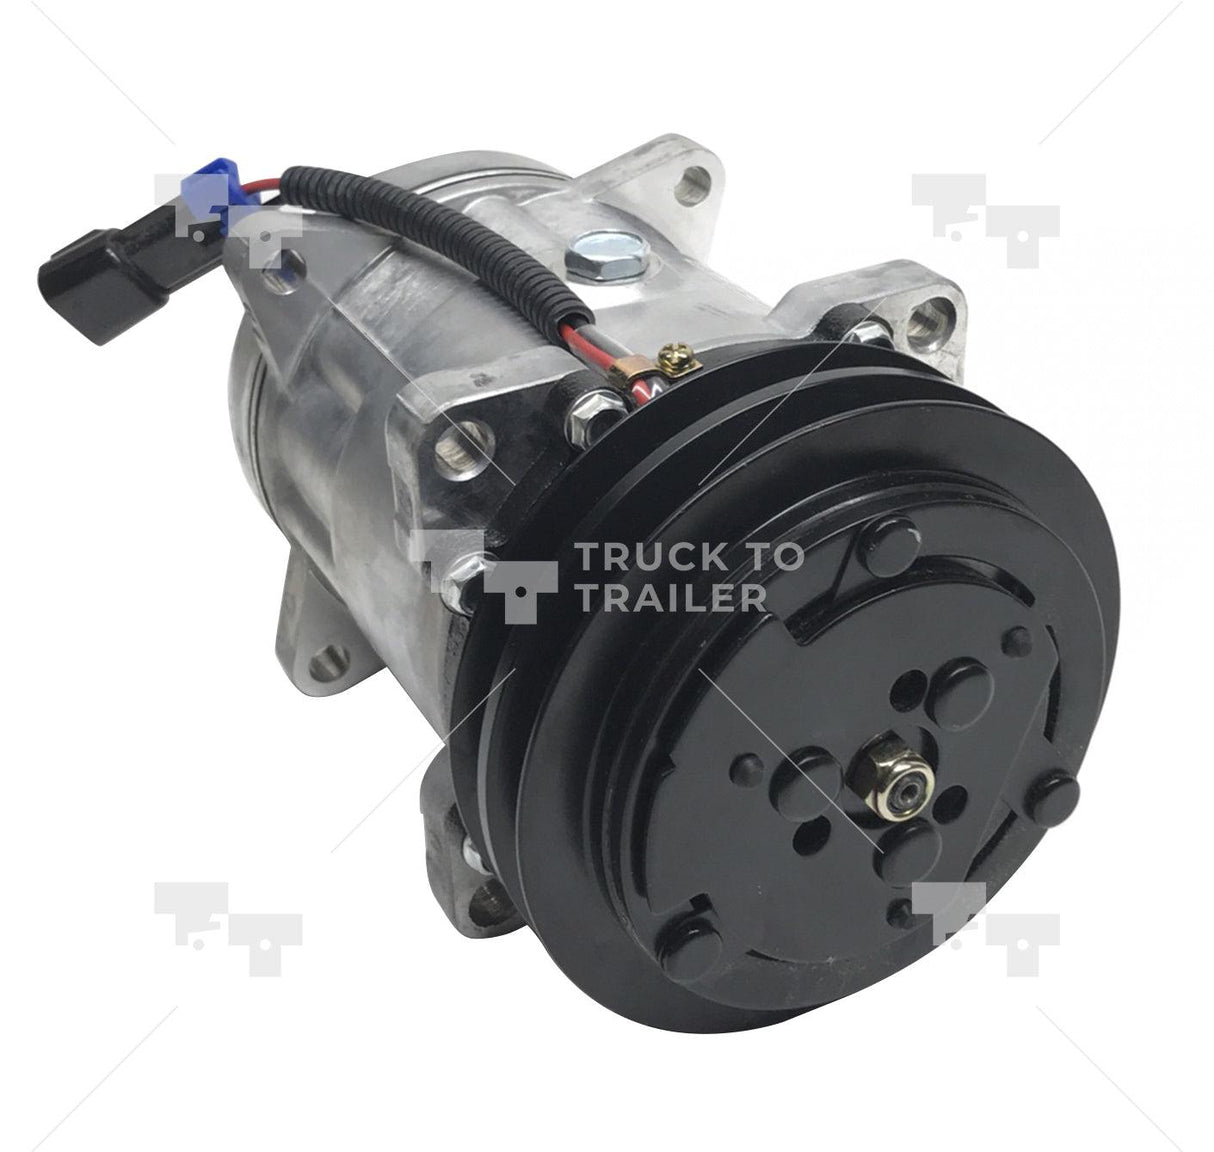 03-3422 22-41180-000 Mei® Truck A/C Ac Compressor For Freightliner.